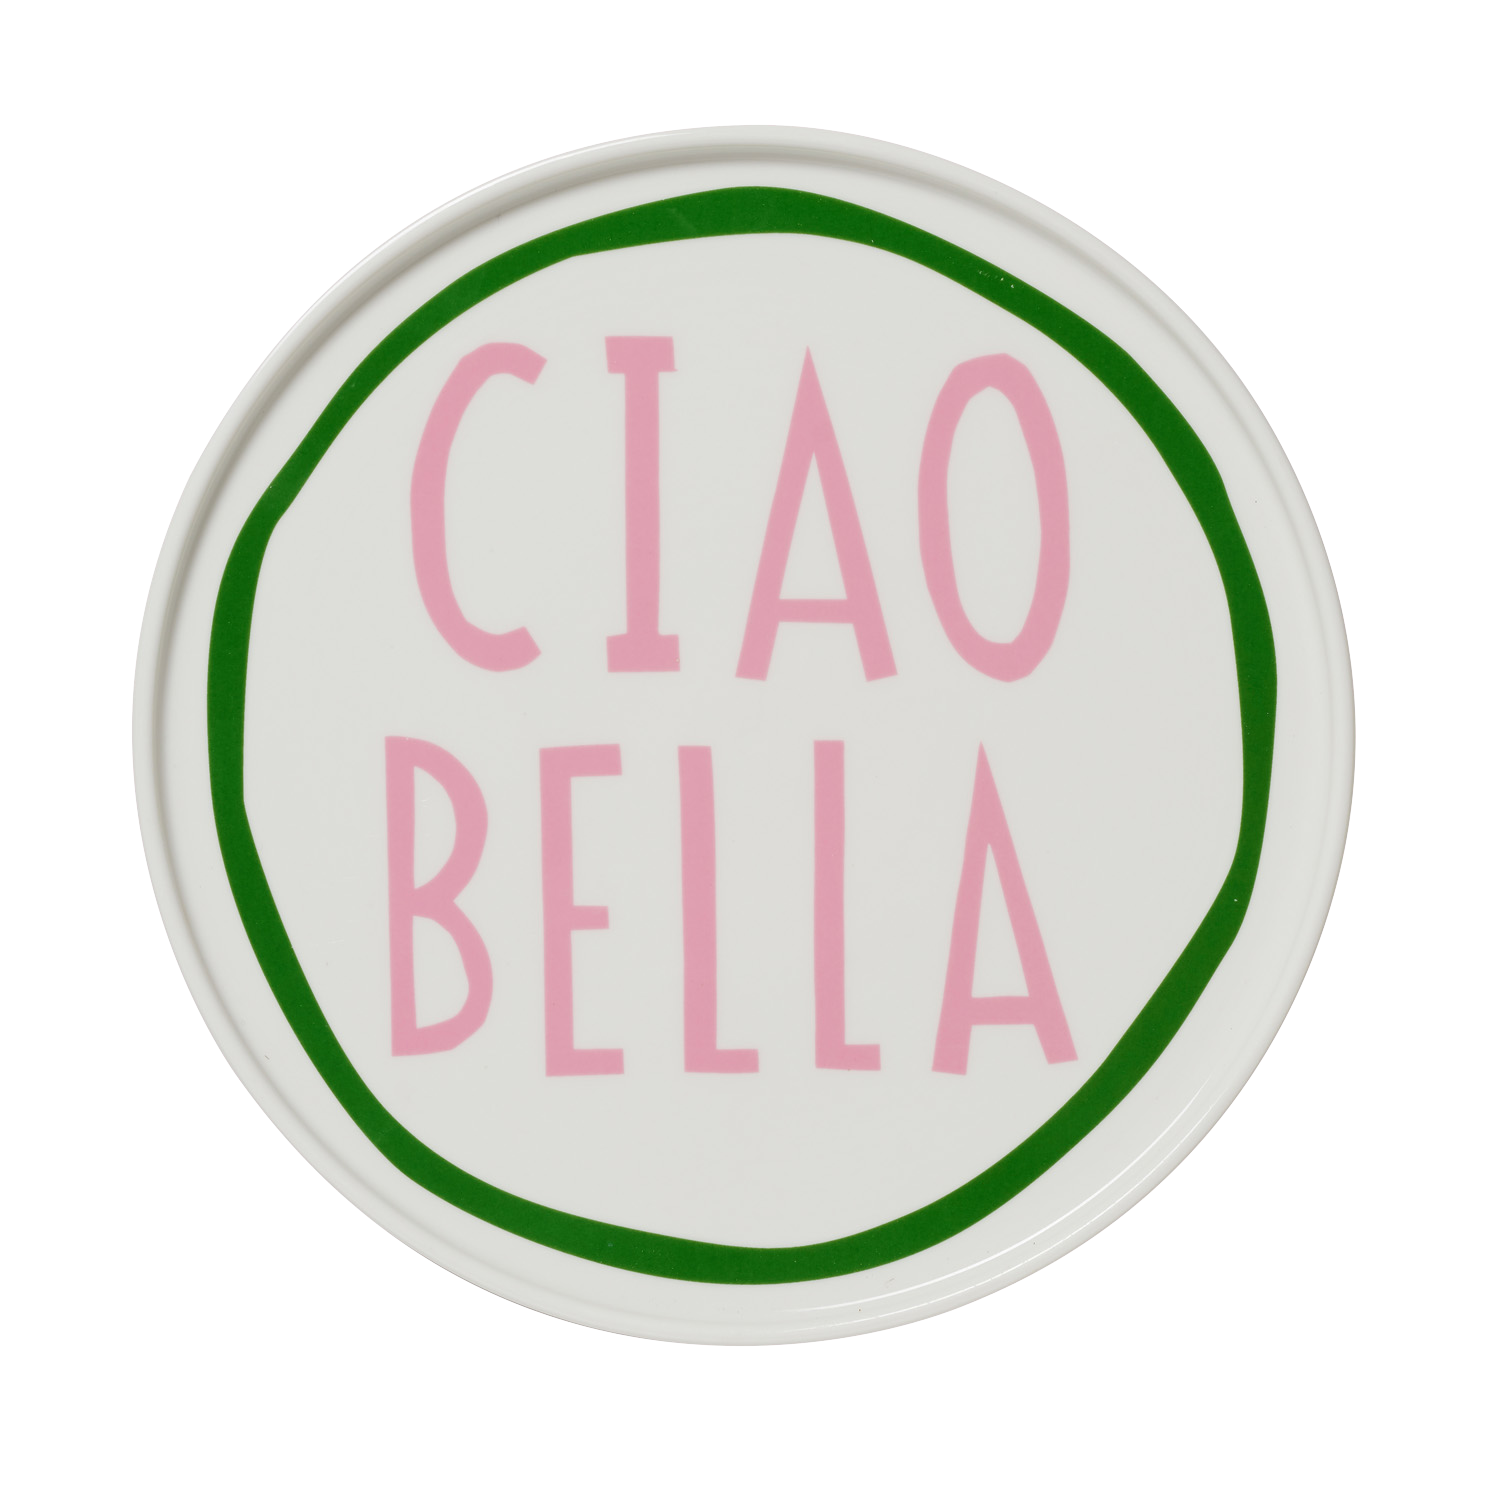 ciao-bella-plate-in-the-roundhouse